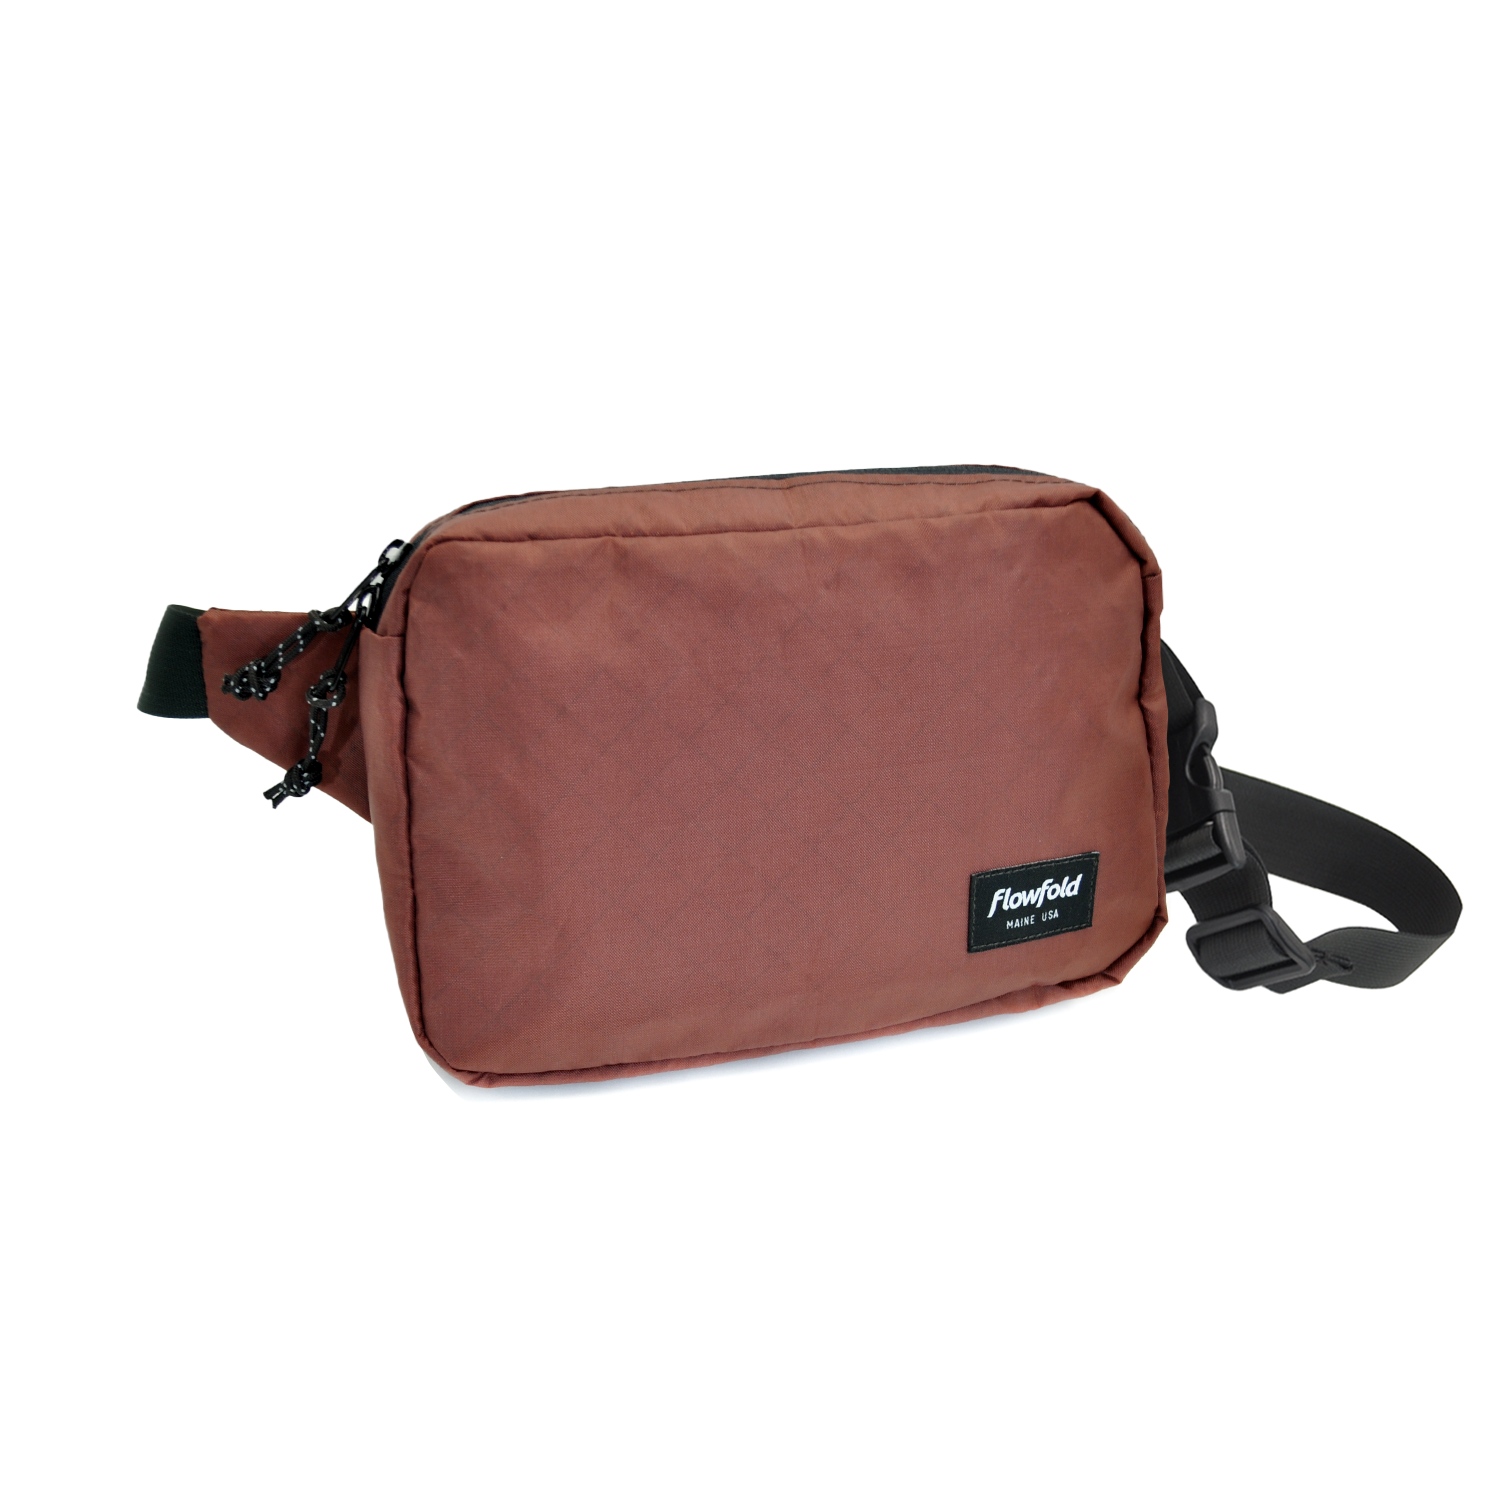 Flowfold Large Explorer Fanny Pack - Recycled Red Barn